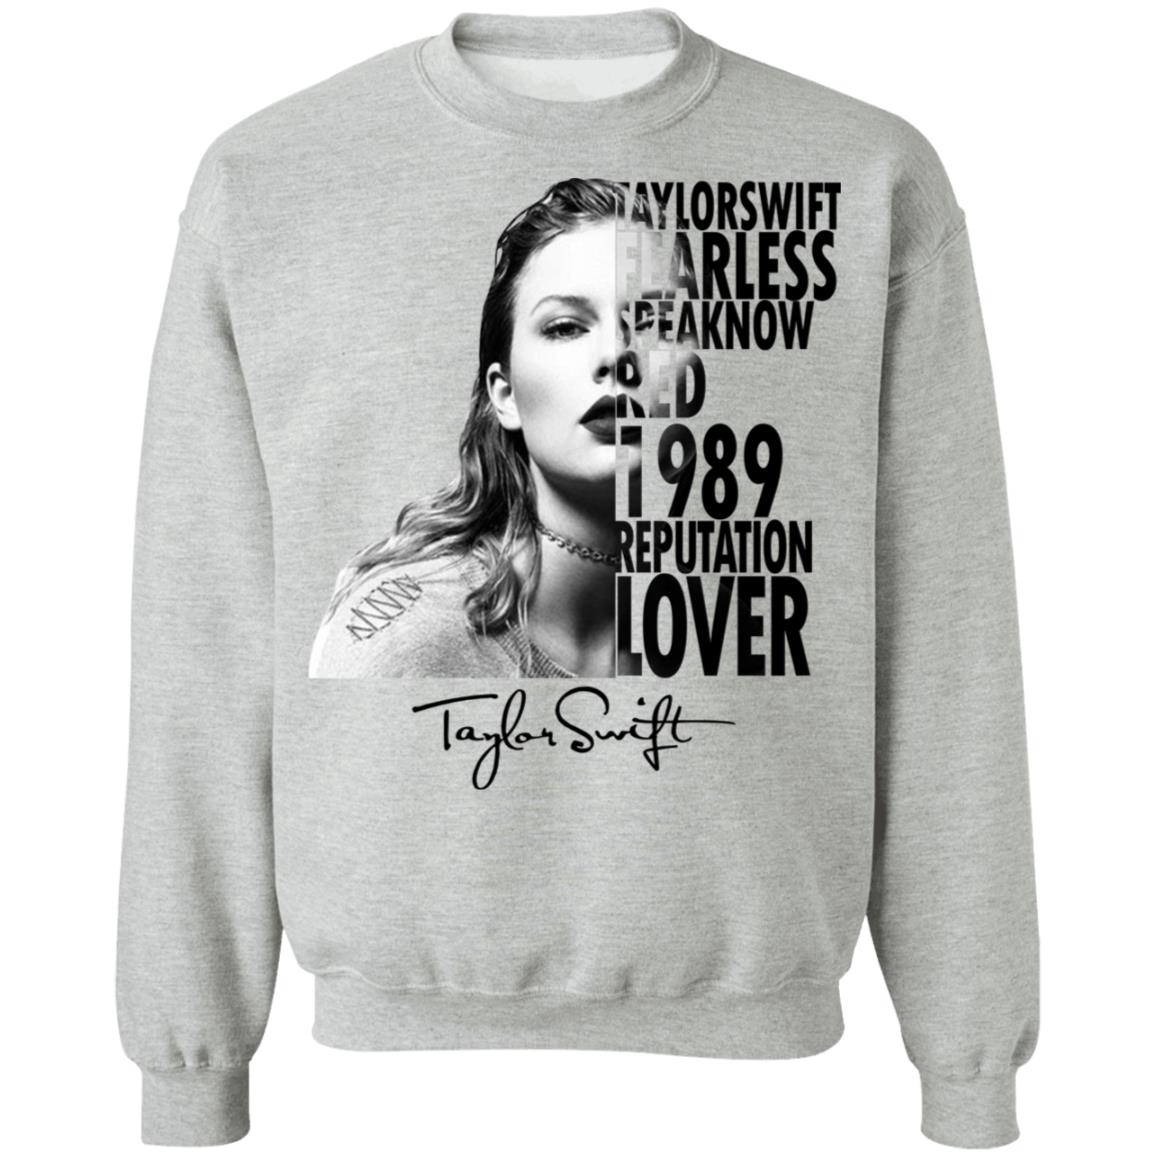 Taylor Swift Fearless Speaknow Red 1989 Reputation Lover Shirt